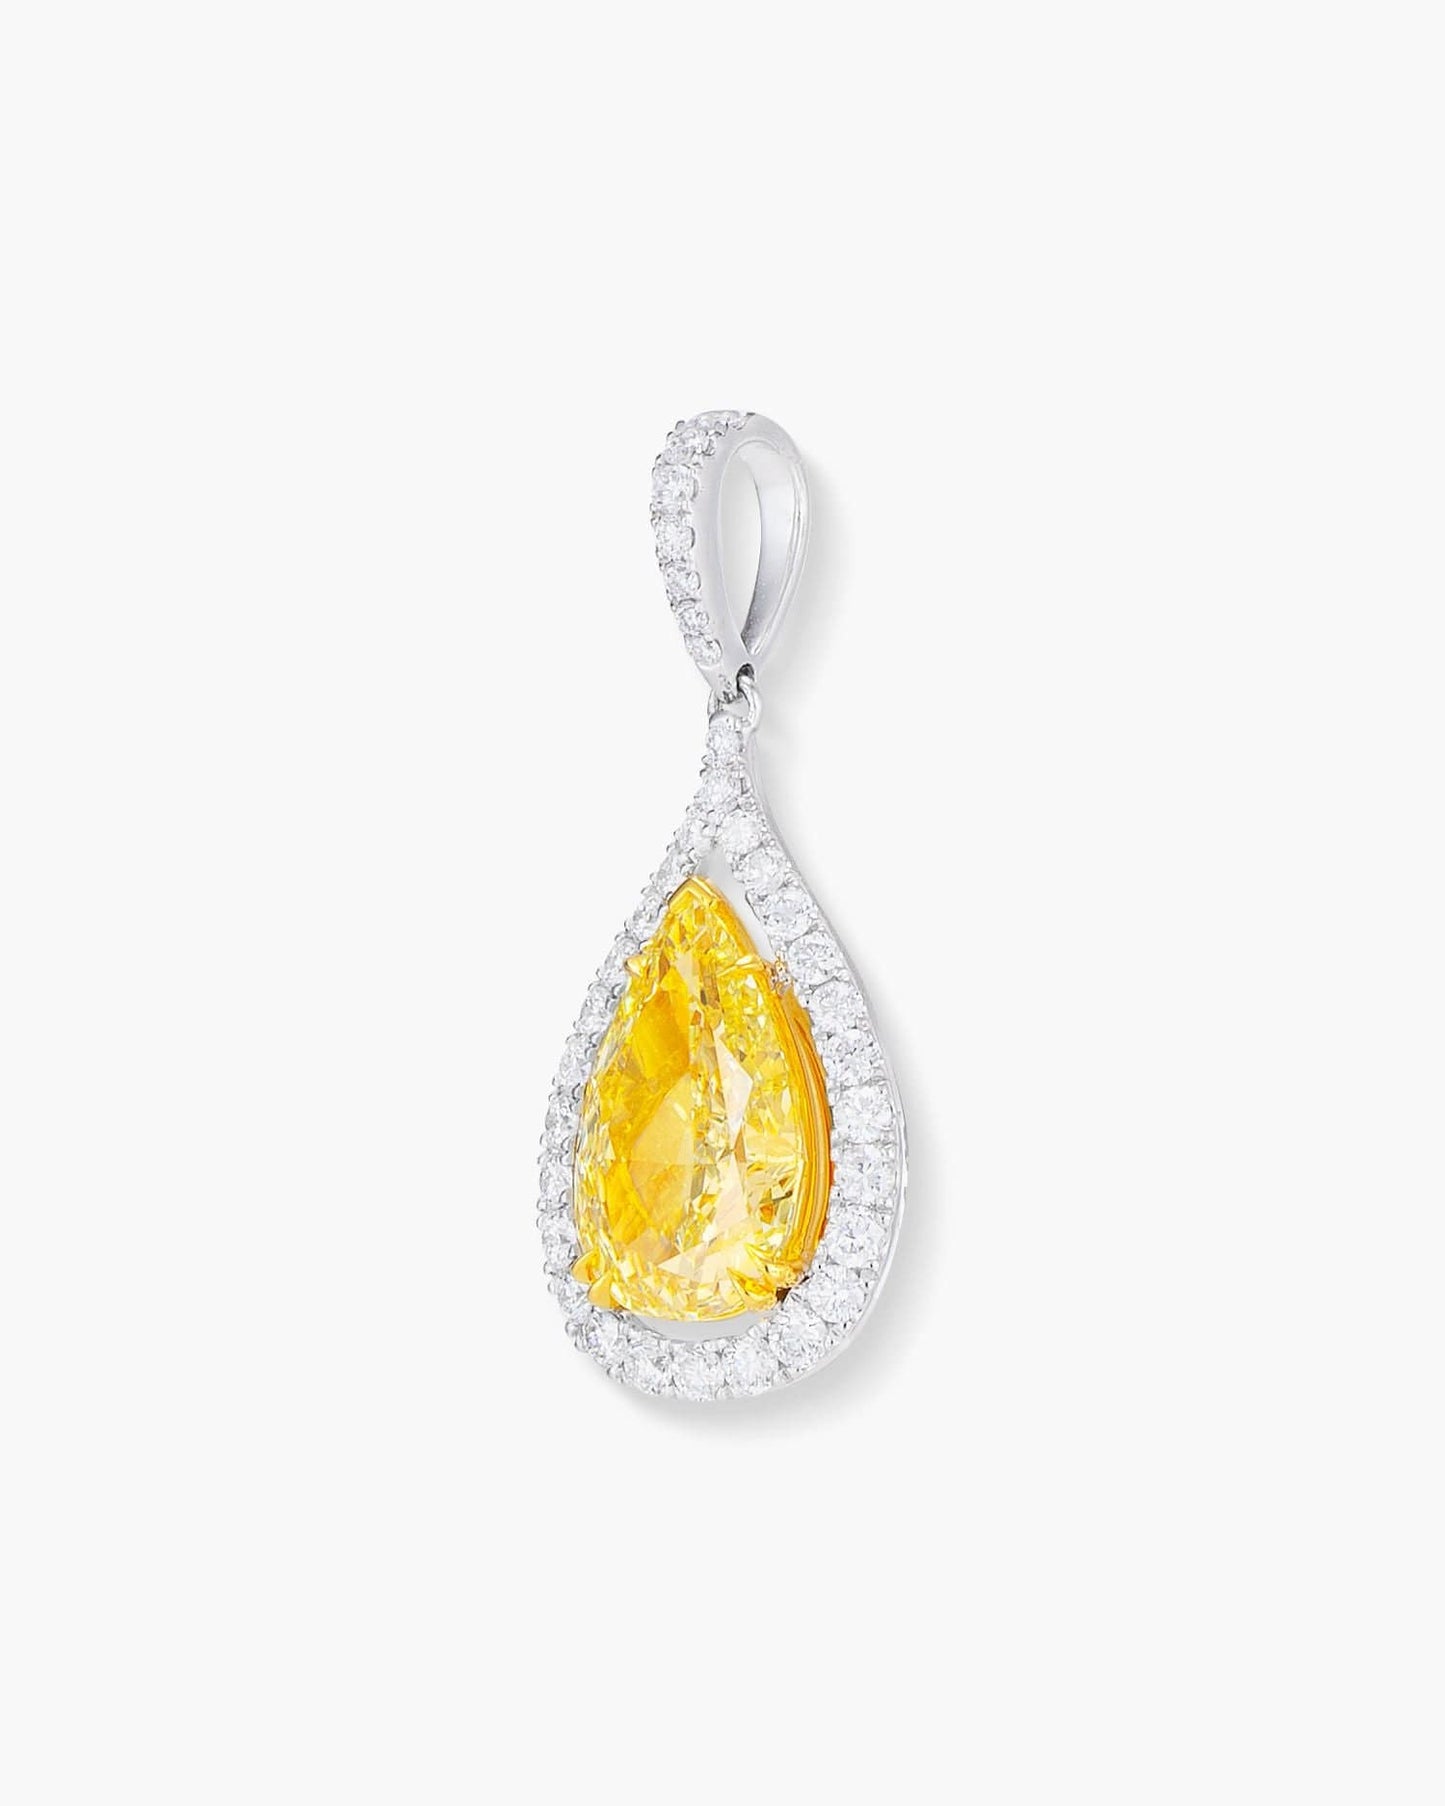 1.51 carat Pear Shape Yellow and White Diamond Pendant Necklace